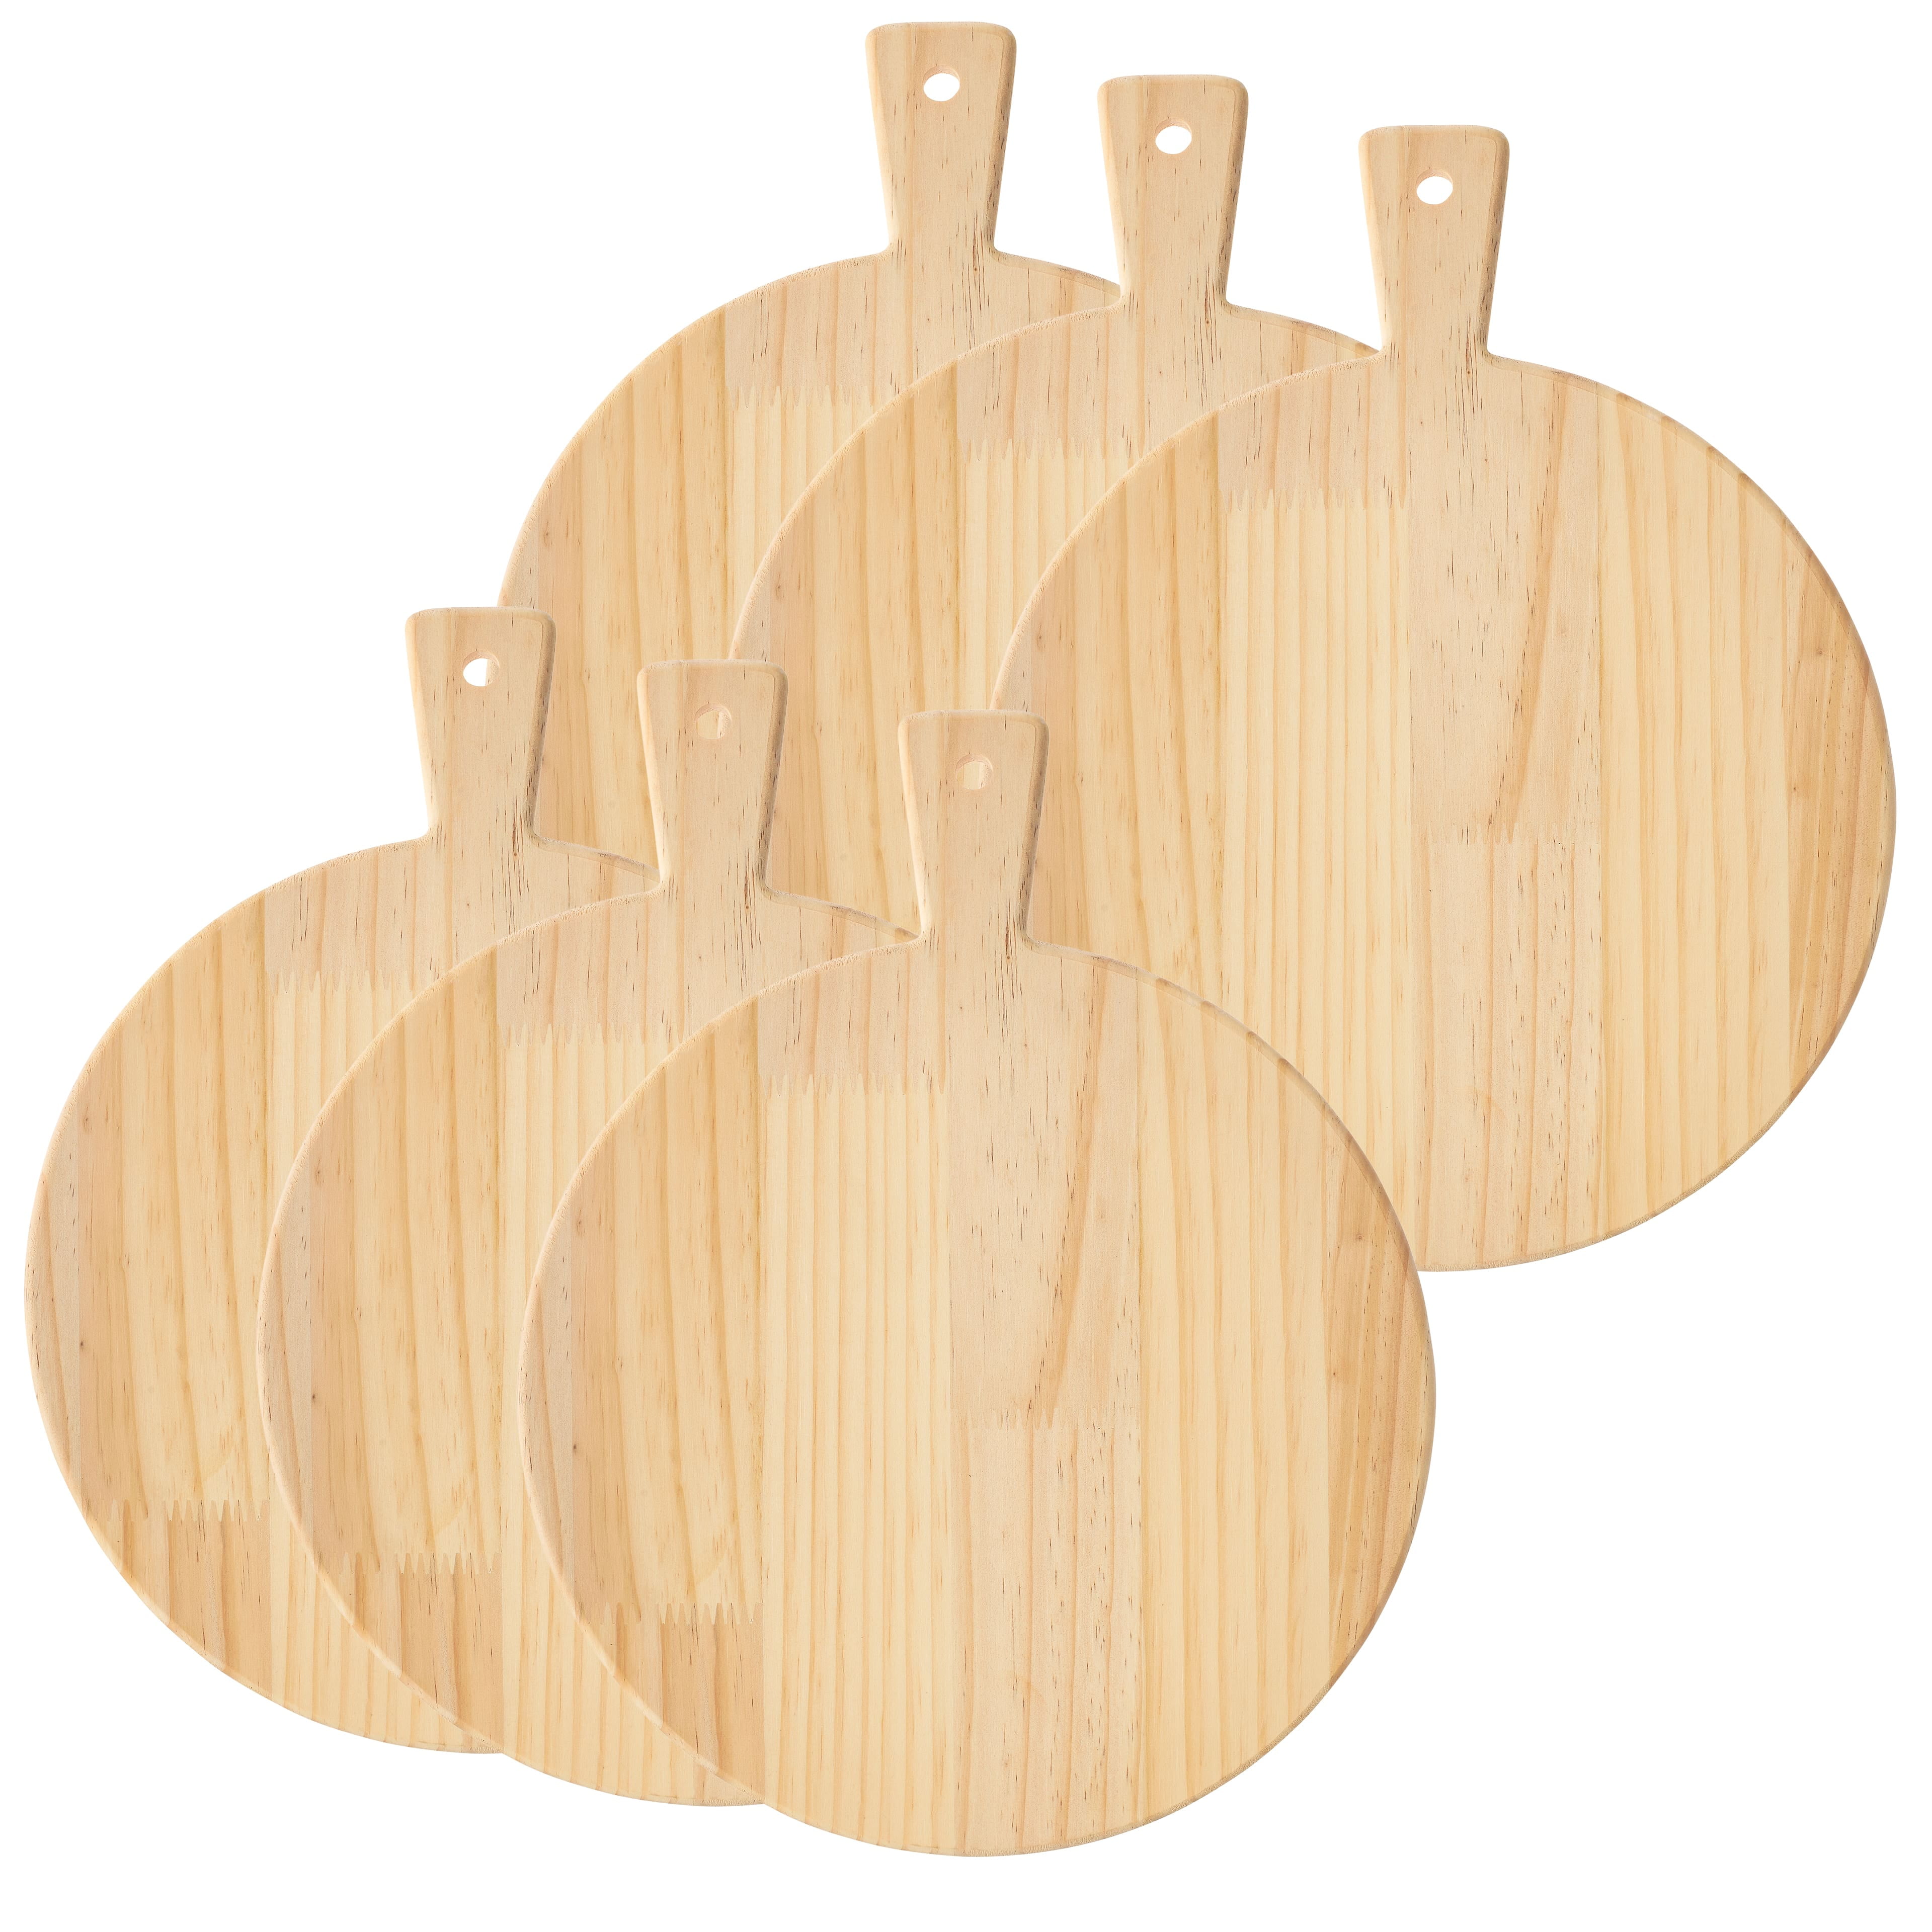 TEHAUX 10pcs Round Wooden Board Large Cutting Board Cooking Butcher Block  Dessert Plate Wood Cutting Board Unfinished Answer Paddle Chopping Board